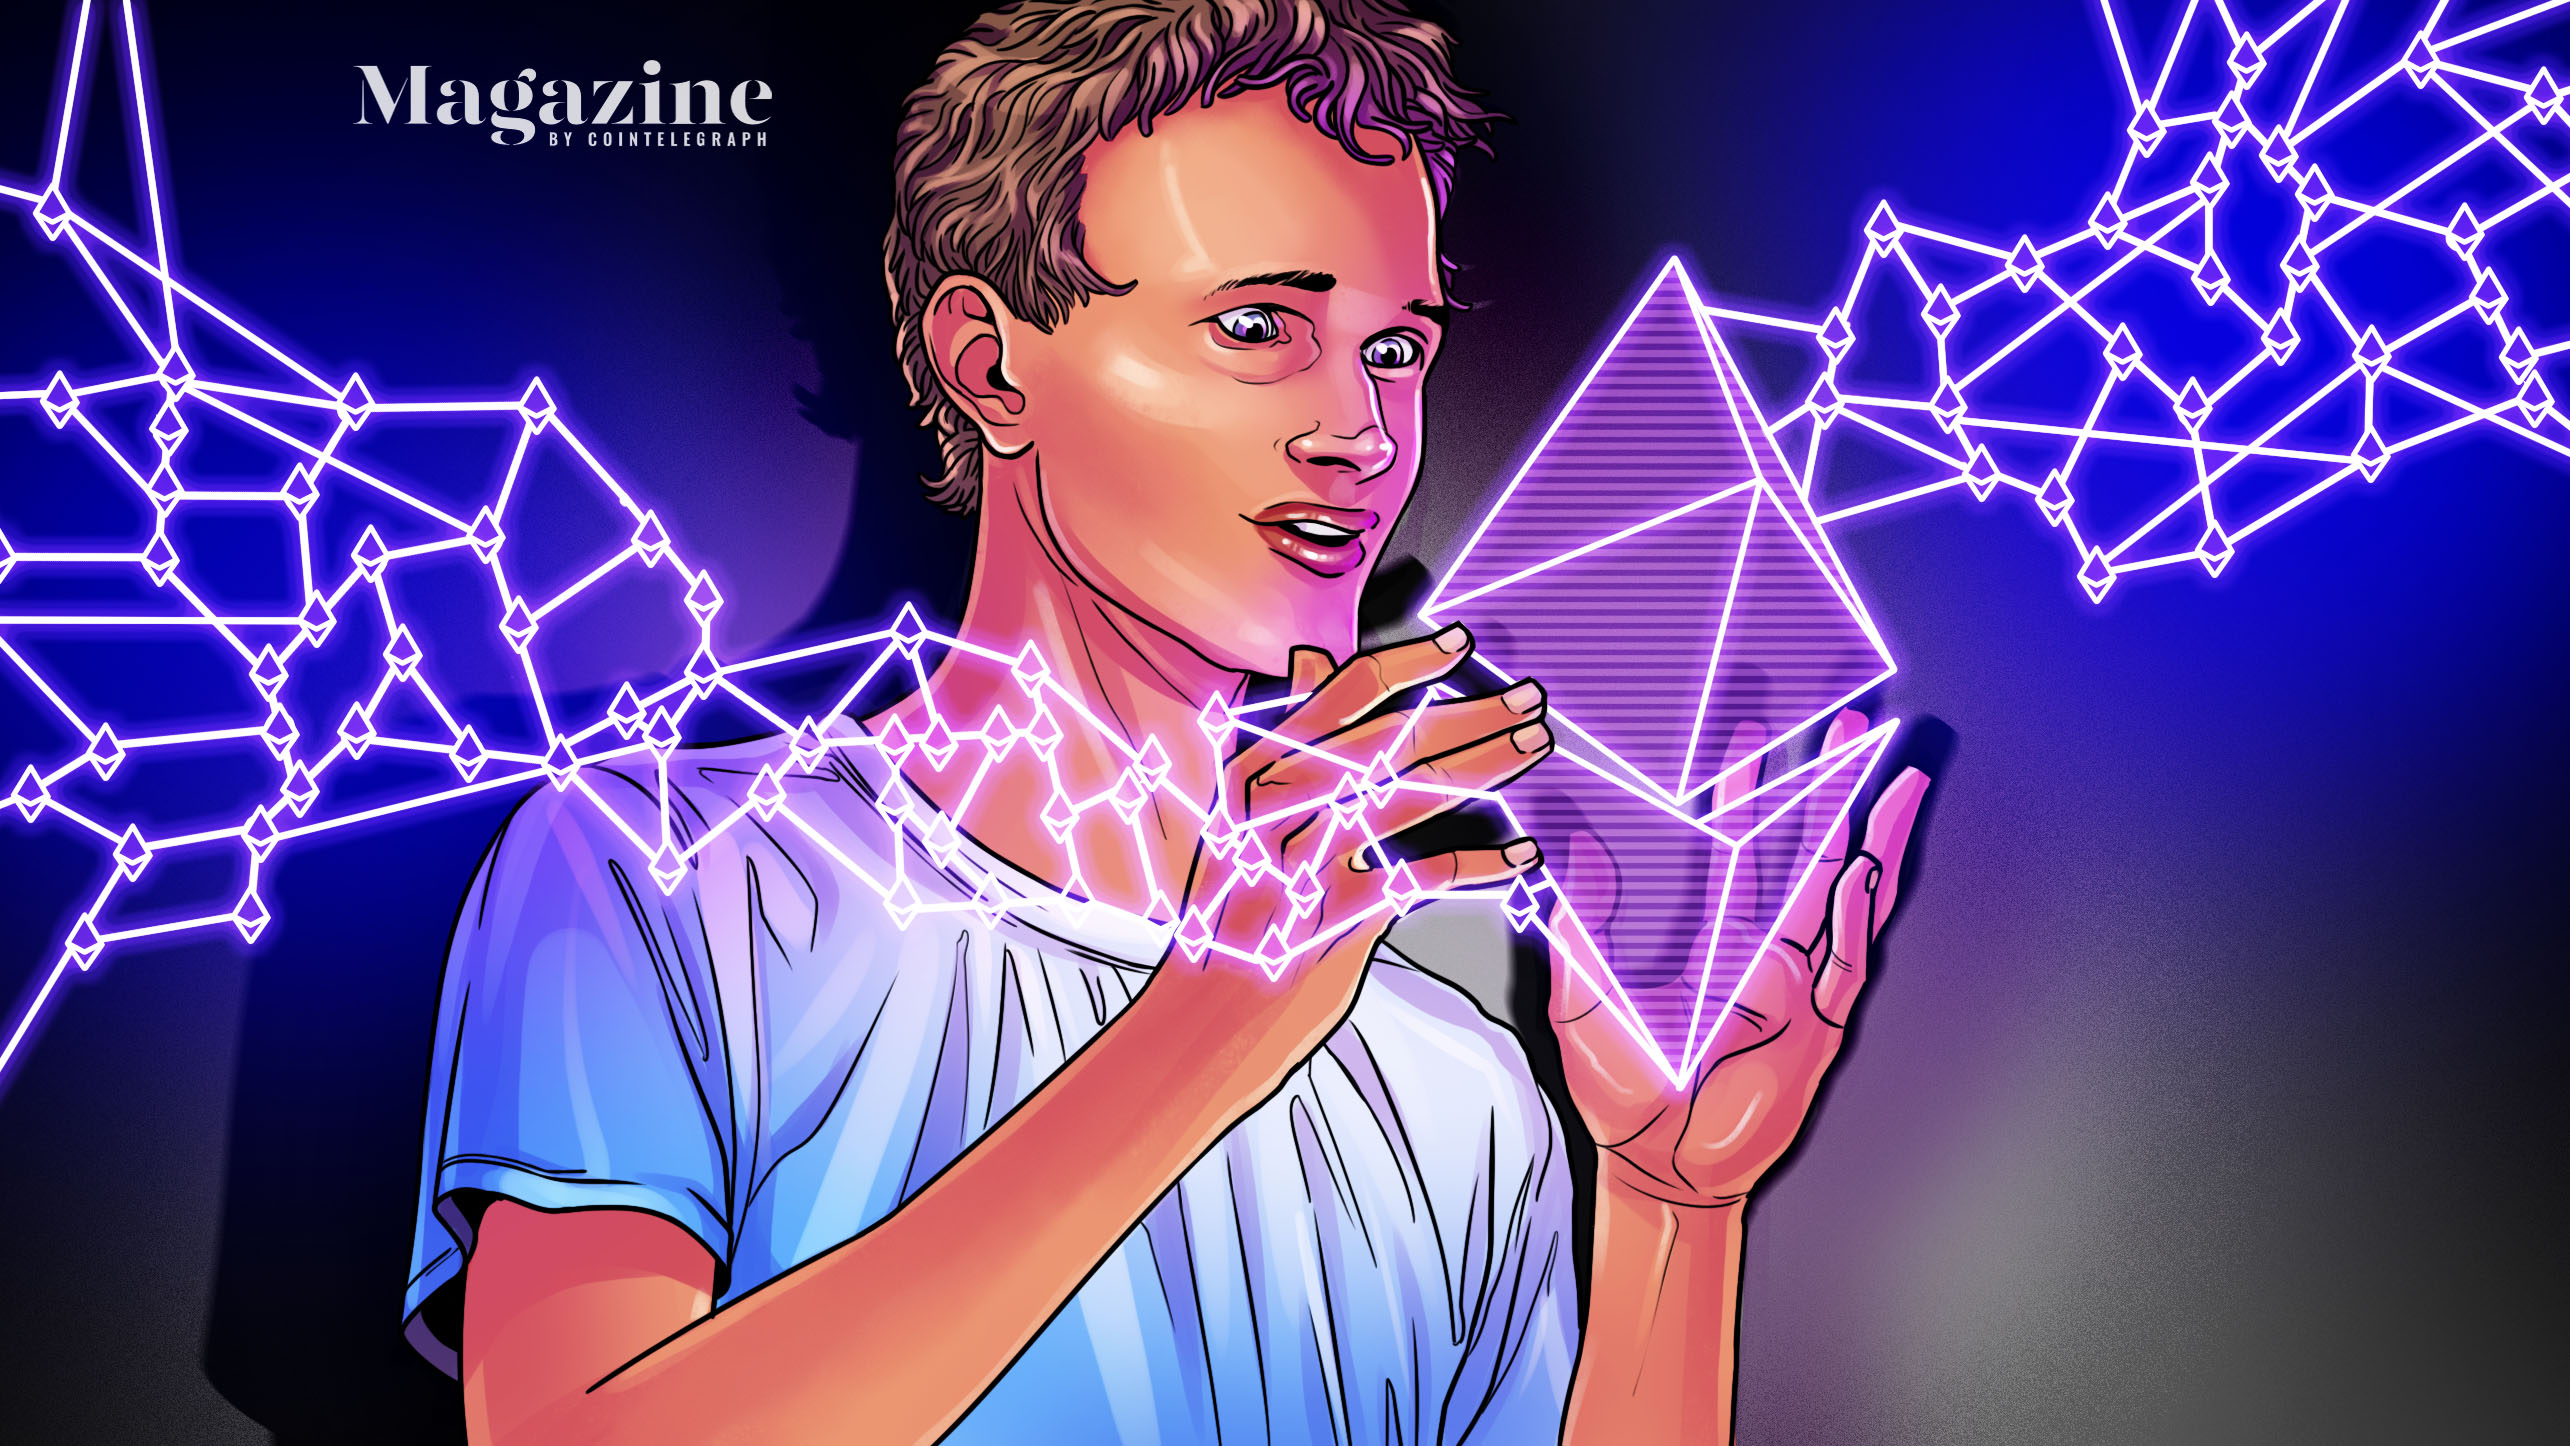 Social credit system or spark for global adoption? – Cointelegraph Magazine